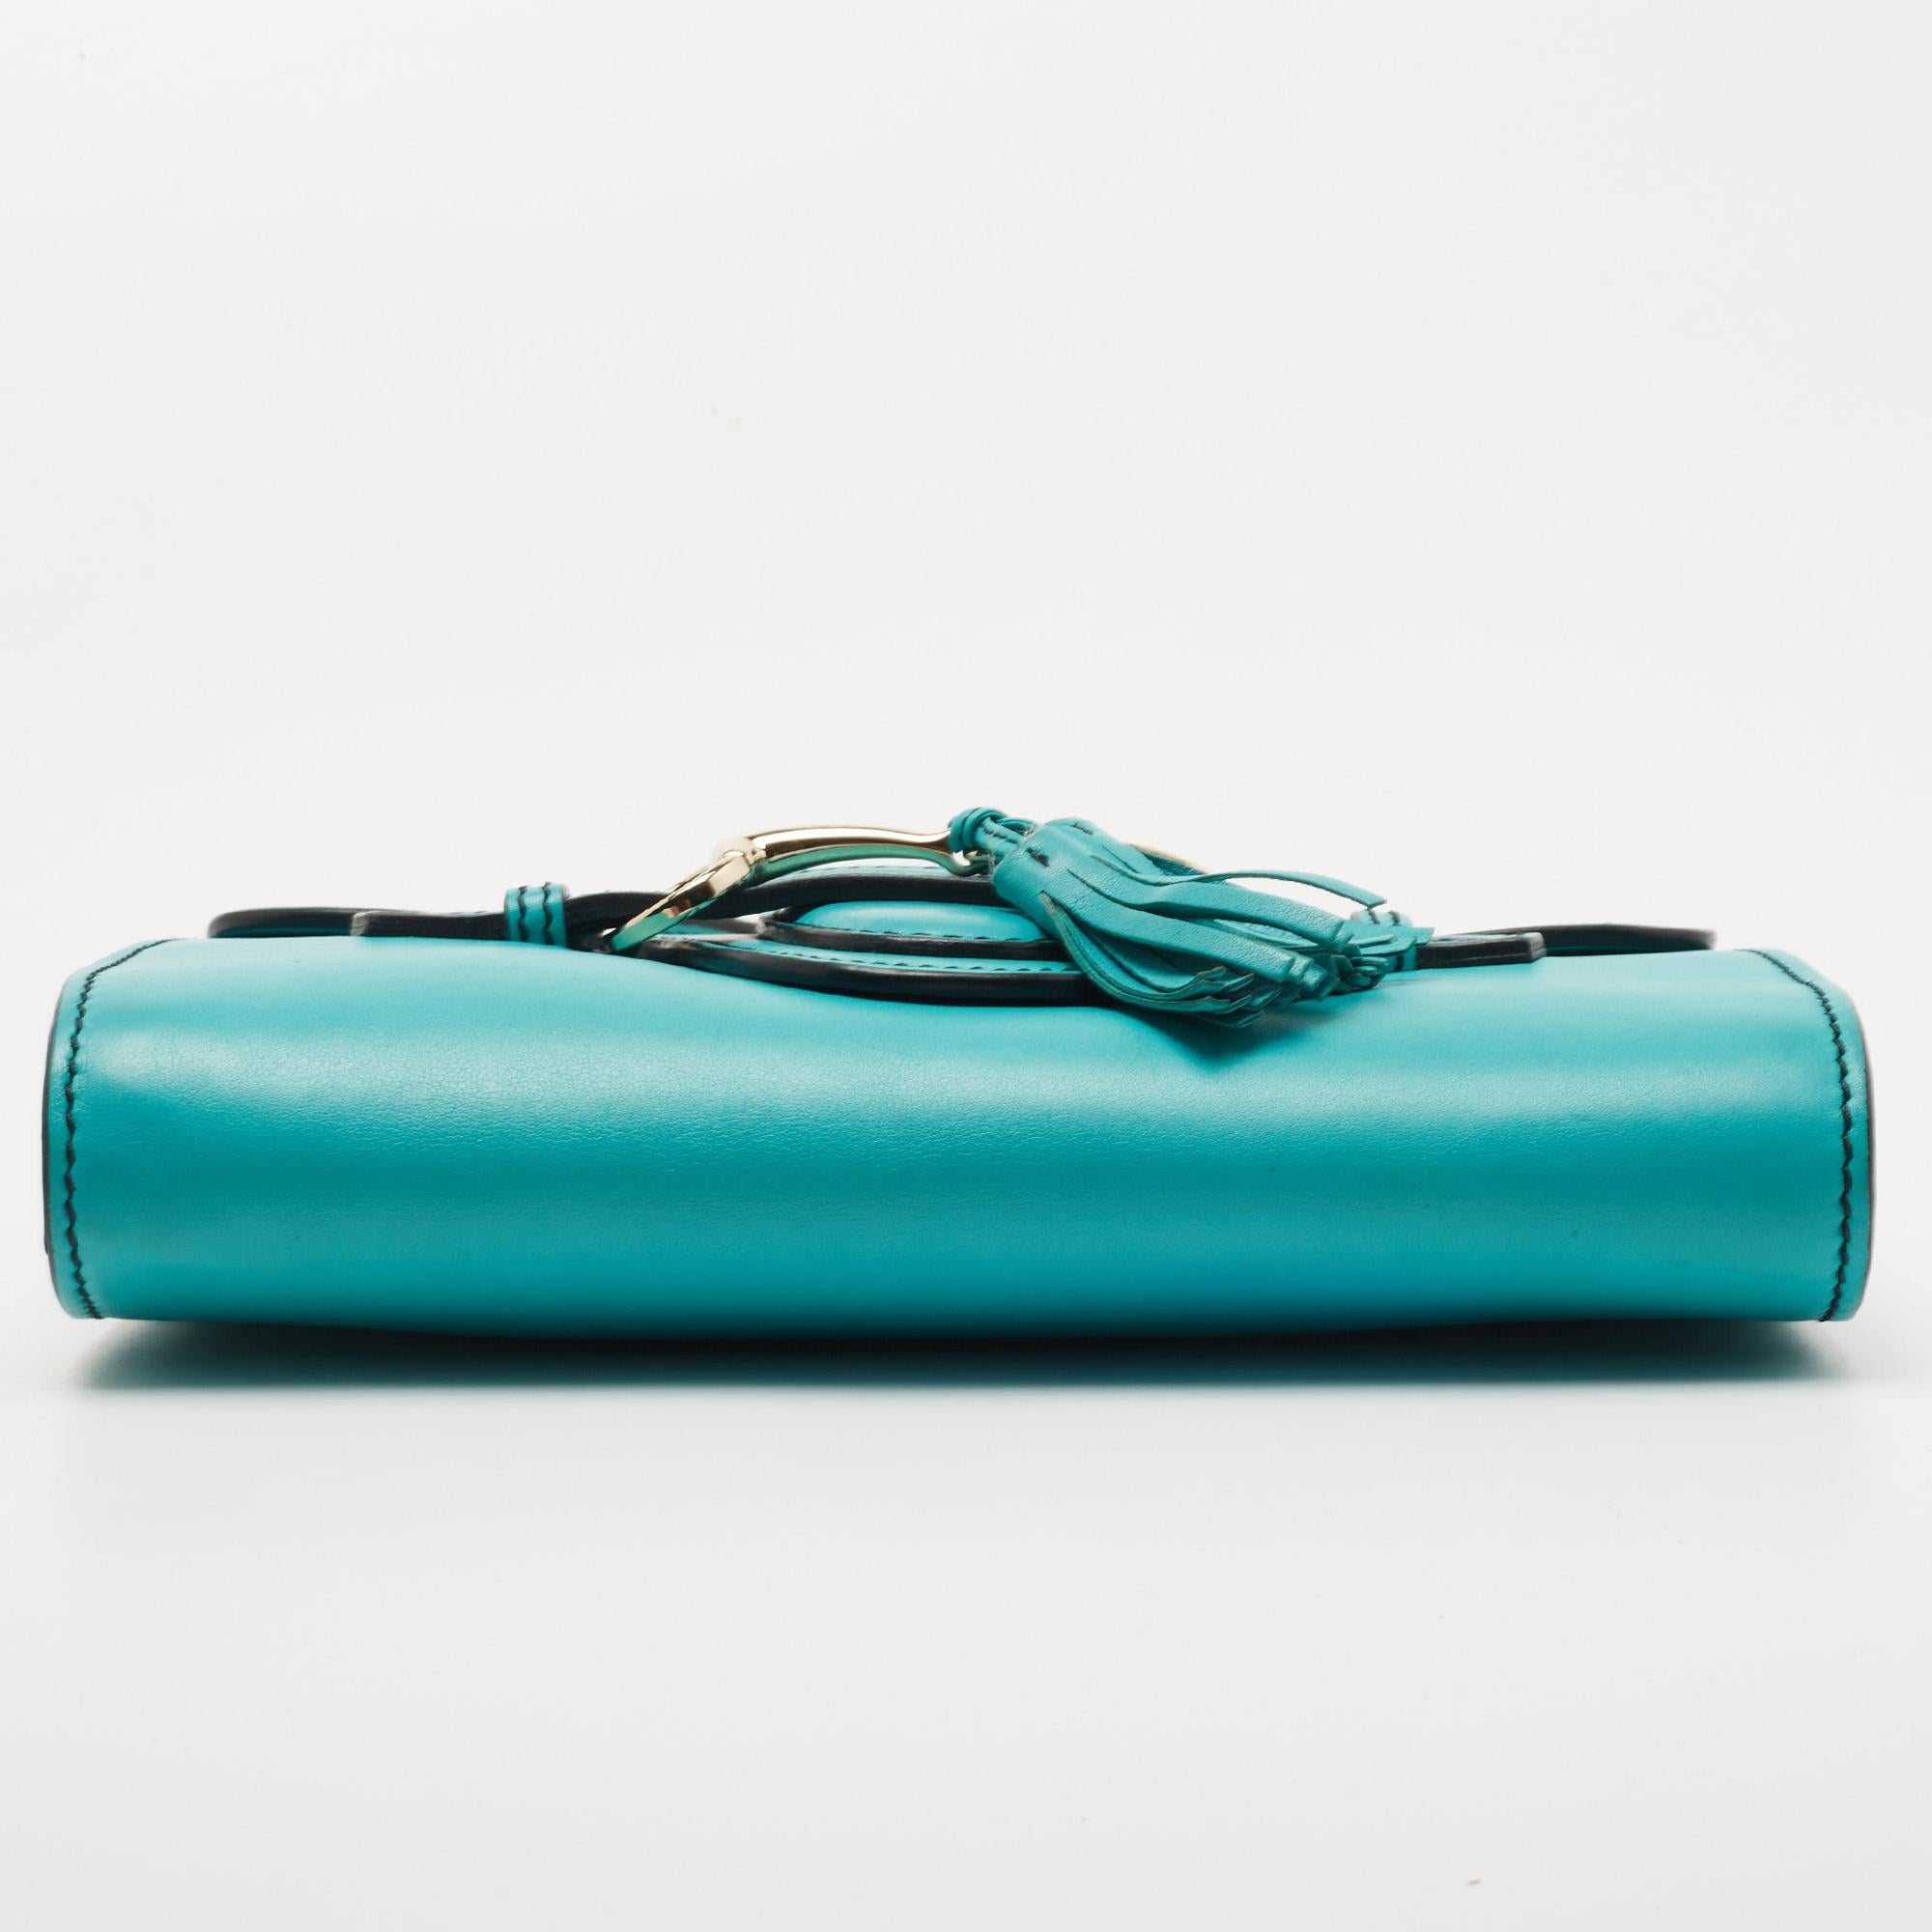 Gucci Turquoise Leather Small Emily Shoulder Bag 2